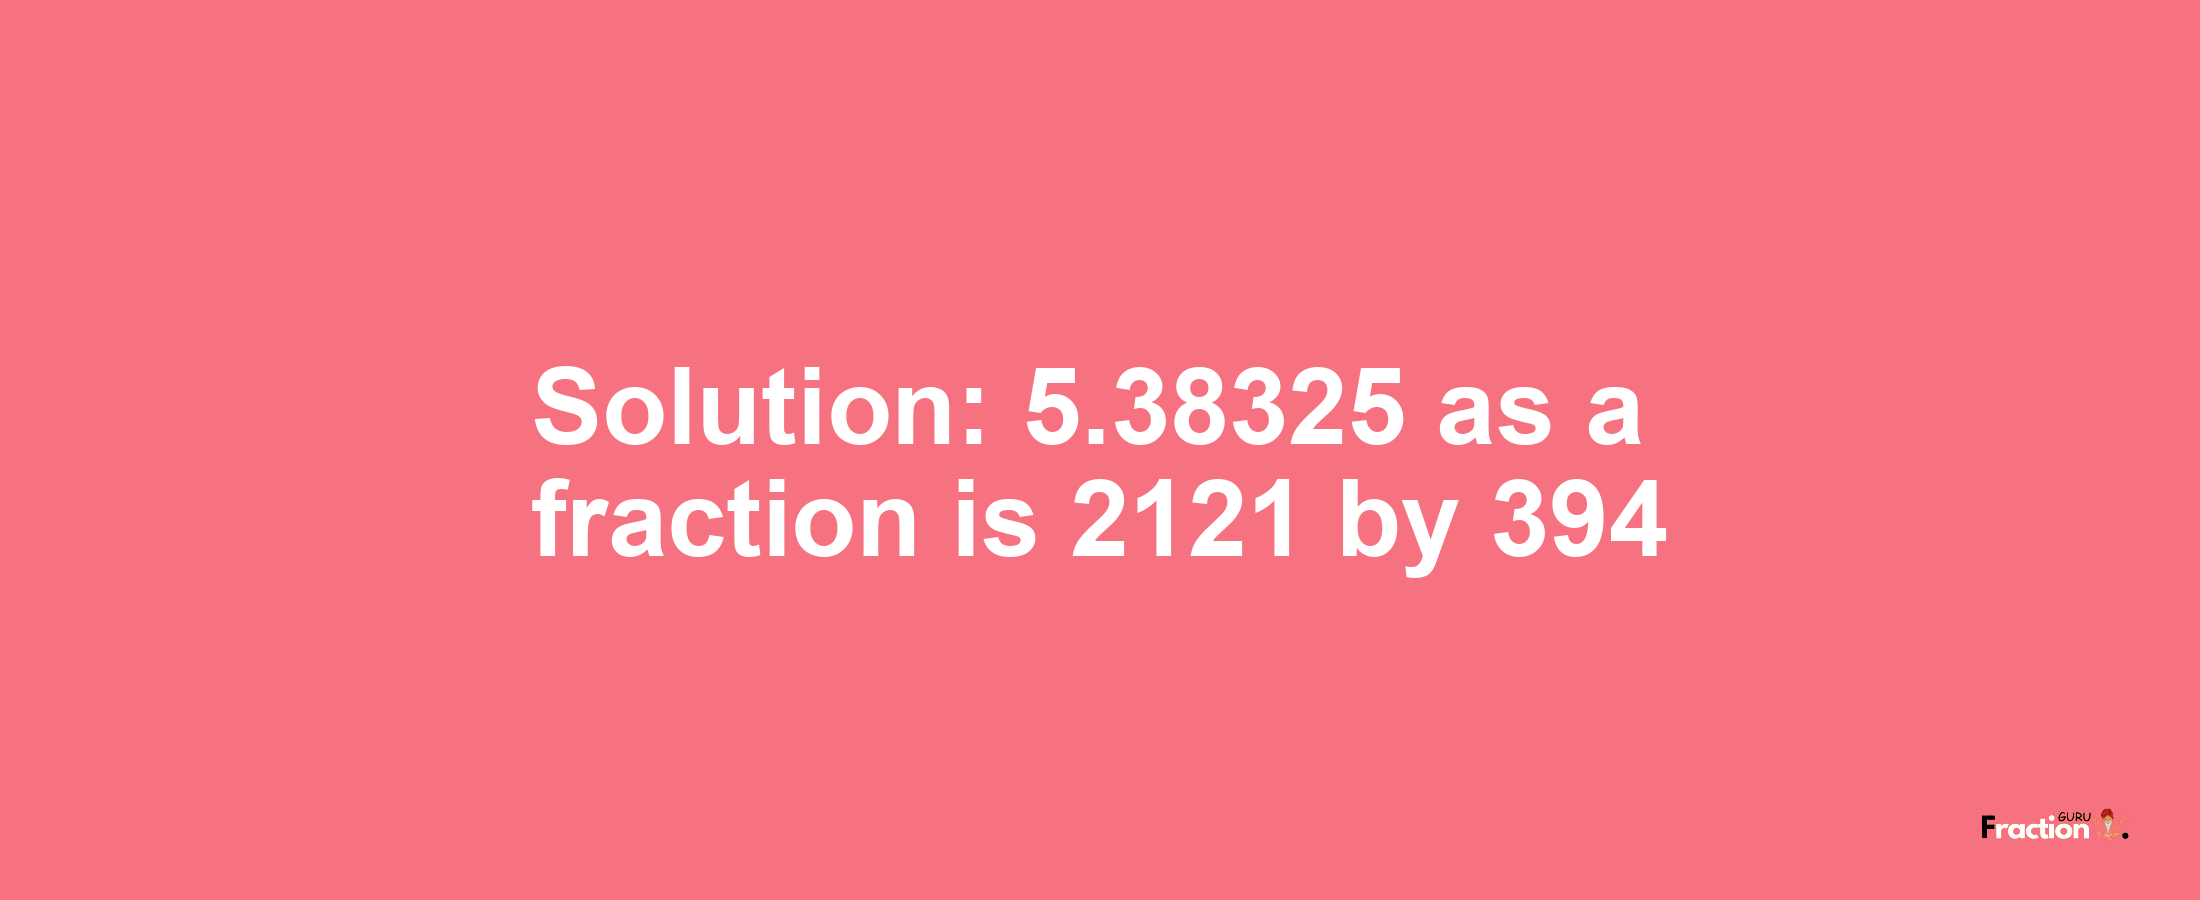 Solution:5.38325 as a fraction is 2121/394